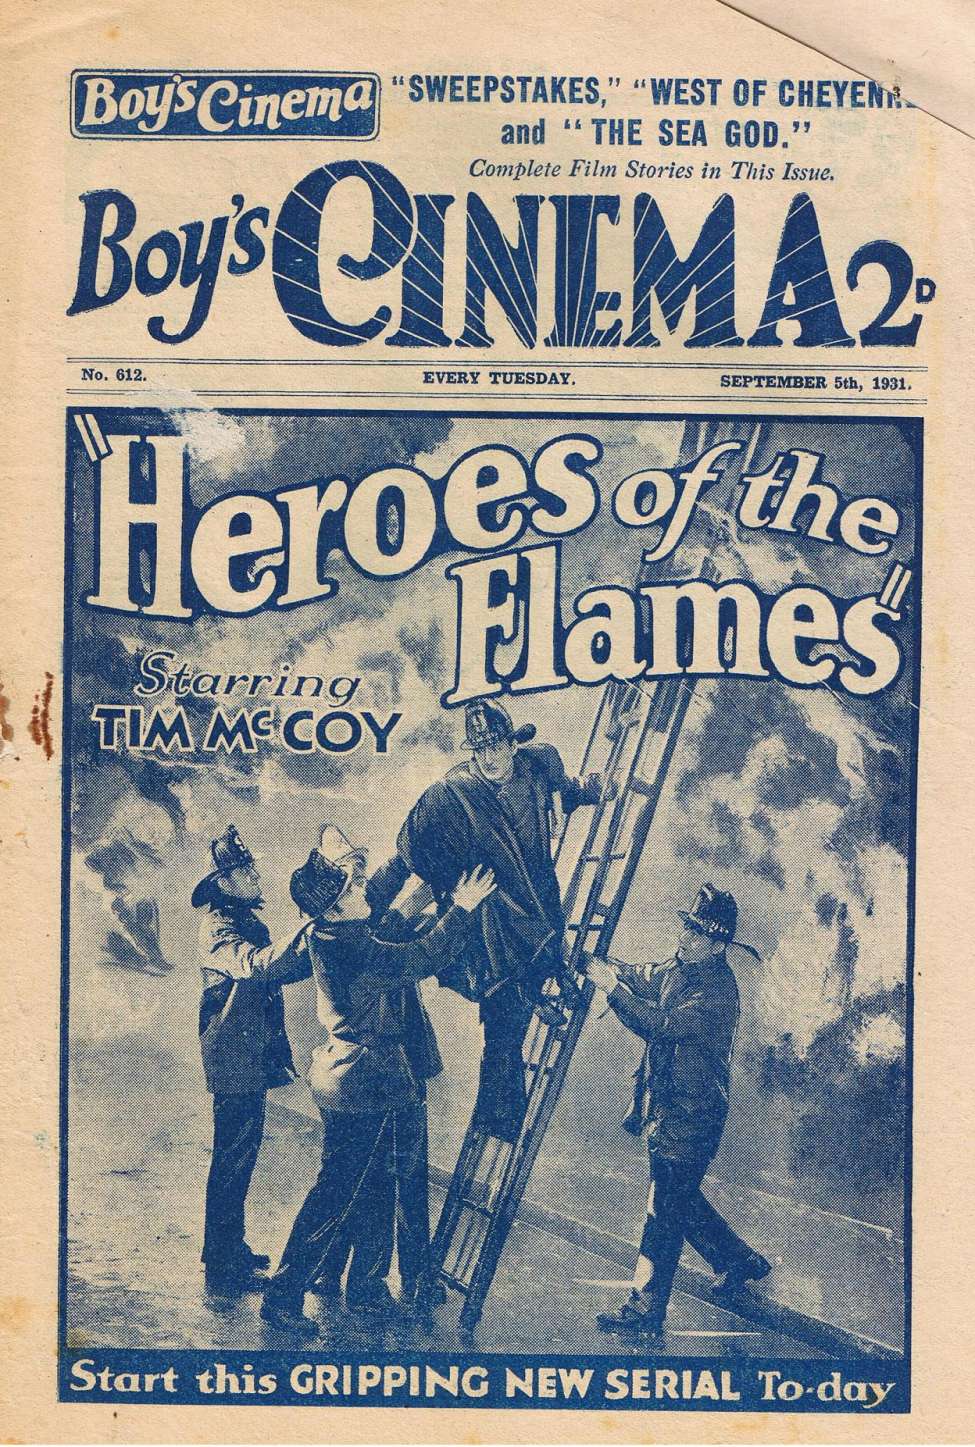 Comic Book Cover For Boy's Cinema 612 - Heroes of the Flames - Tim McCoy